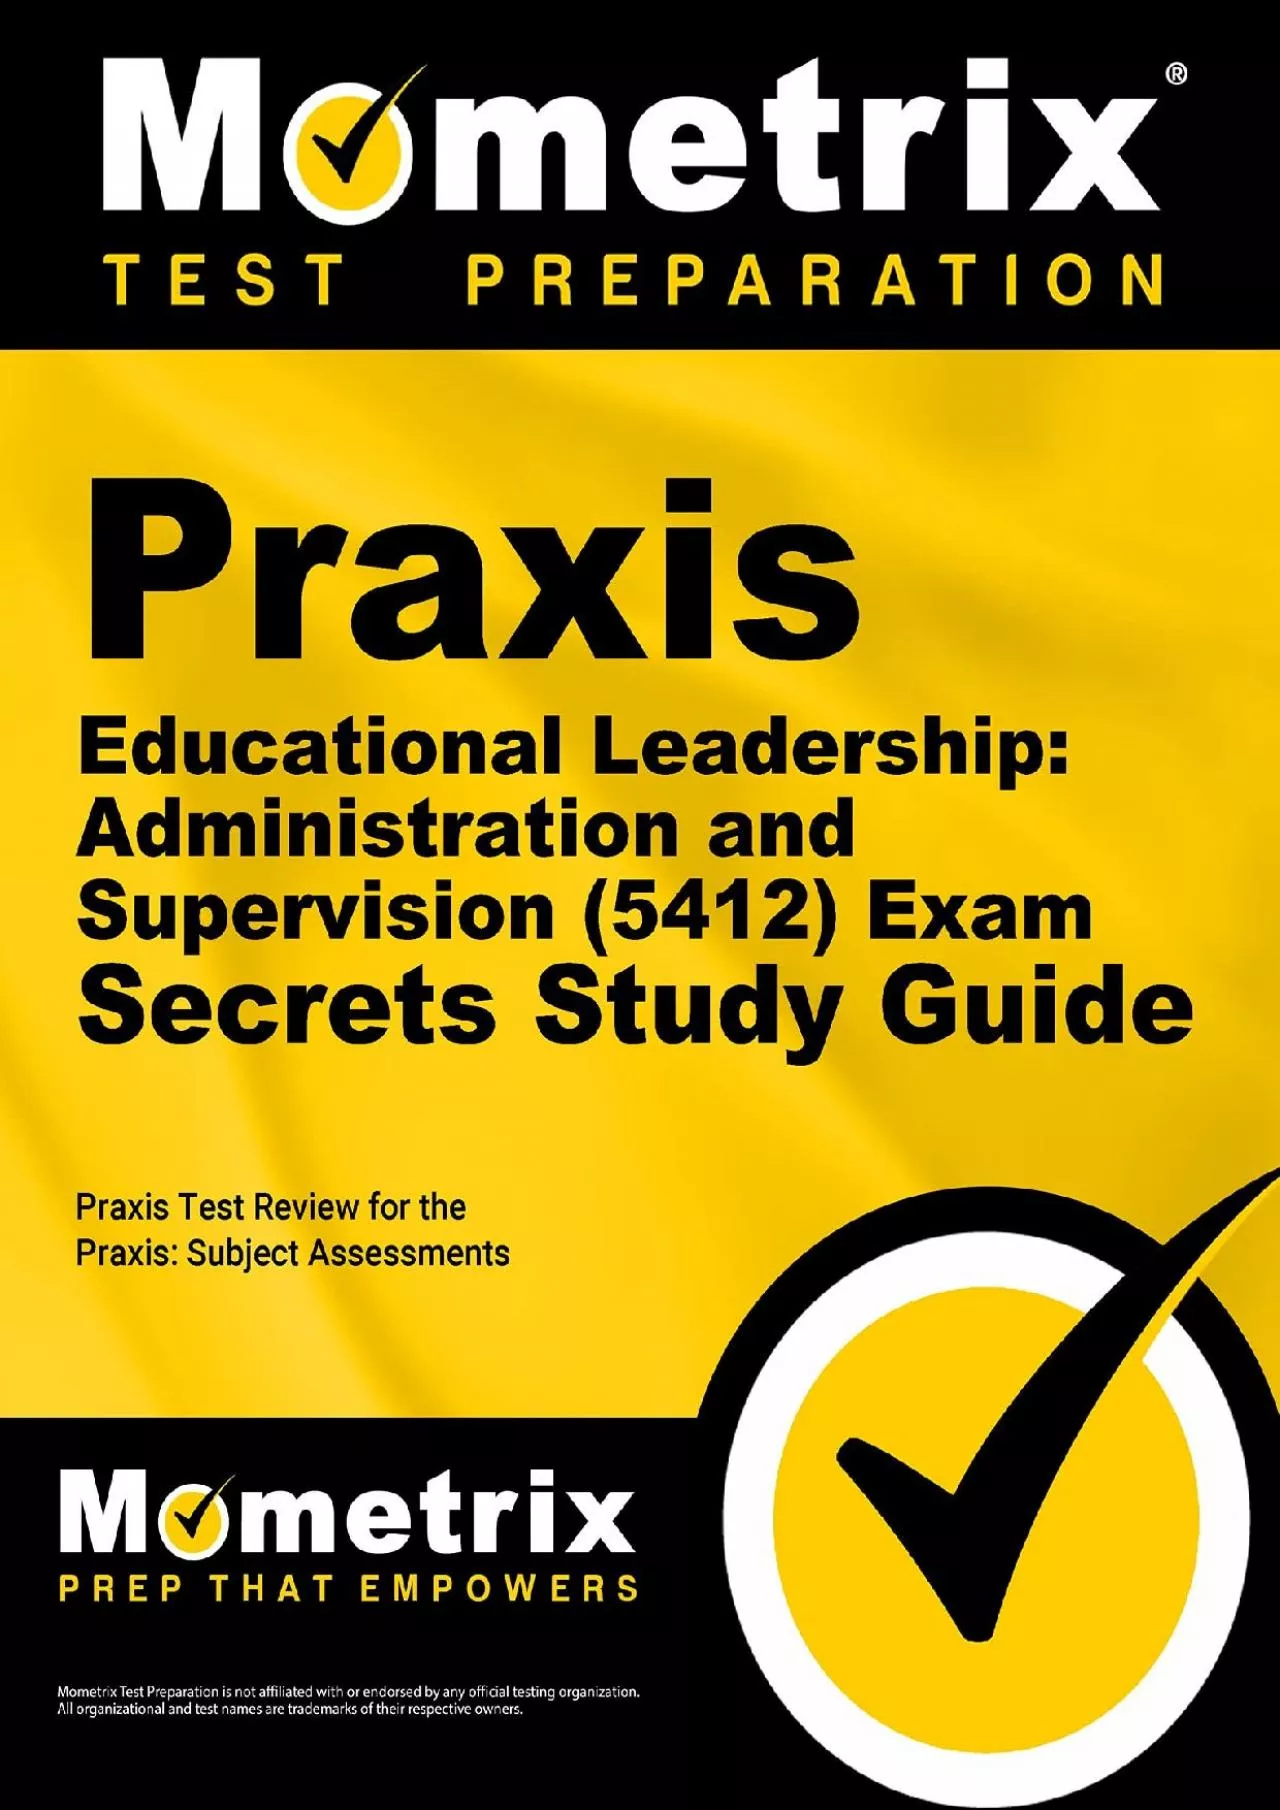 [DOWNLOAD] Praxis Educational Leadership Administration and Supervision 5412 Exam Secrets